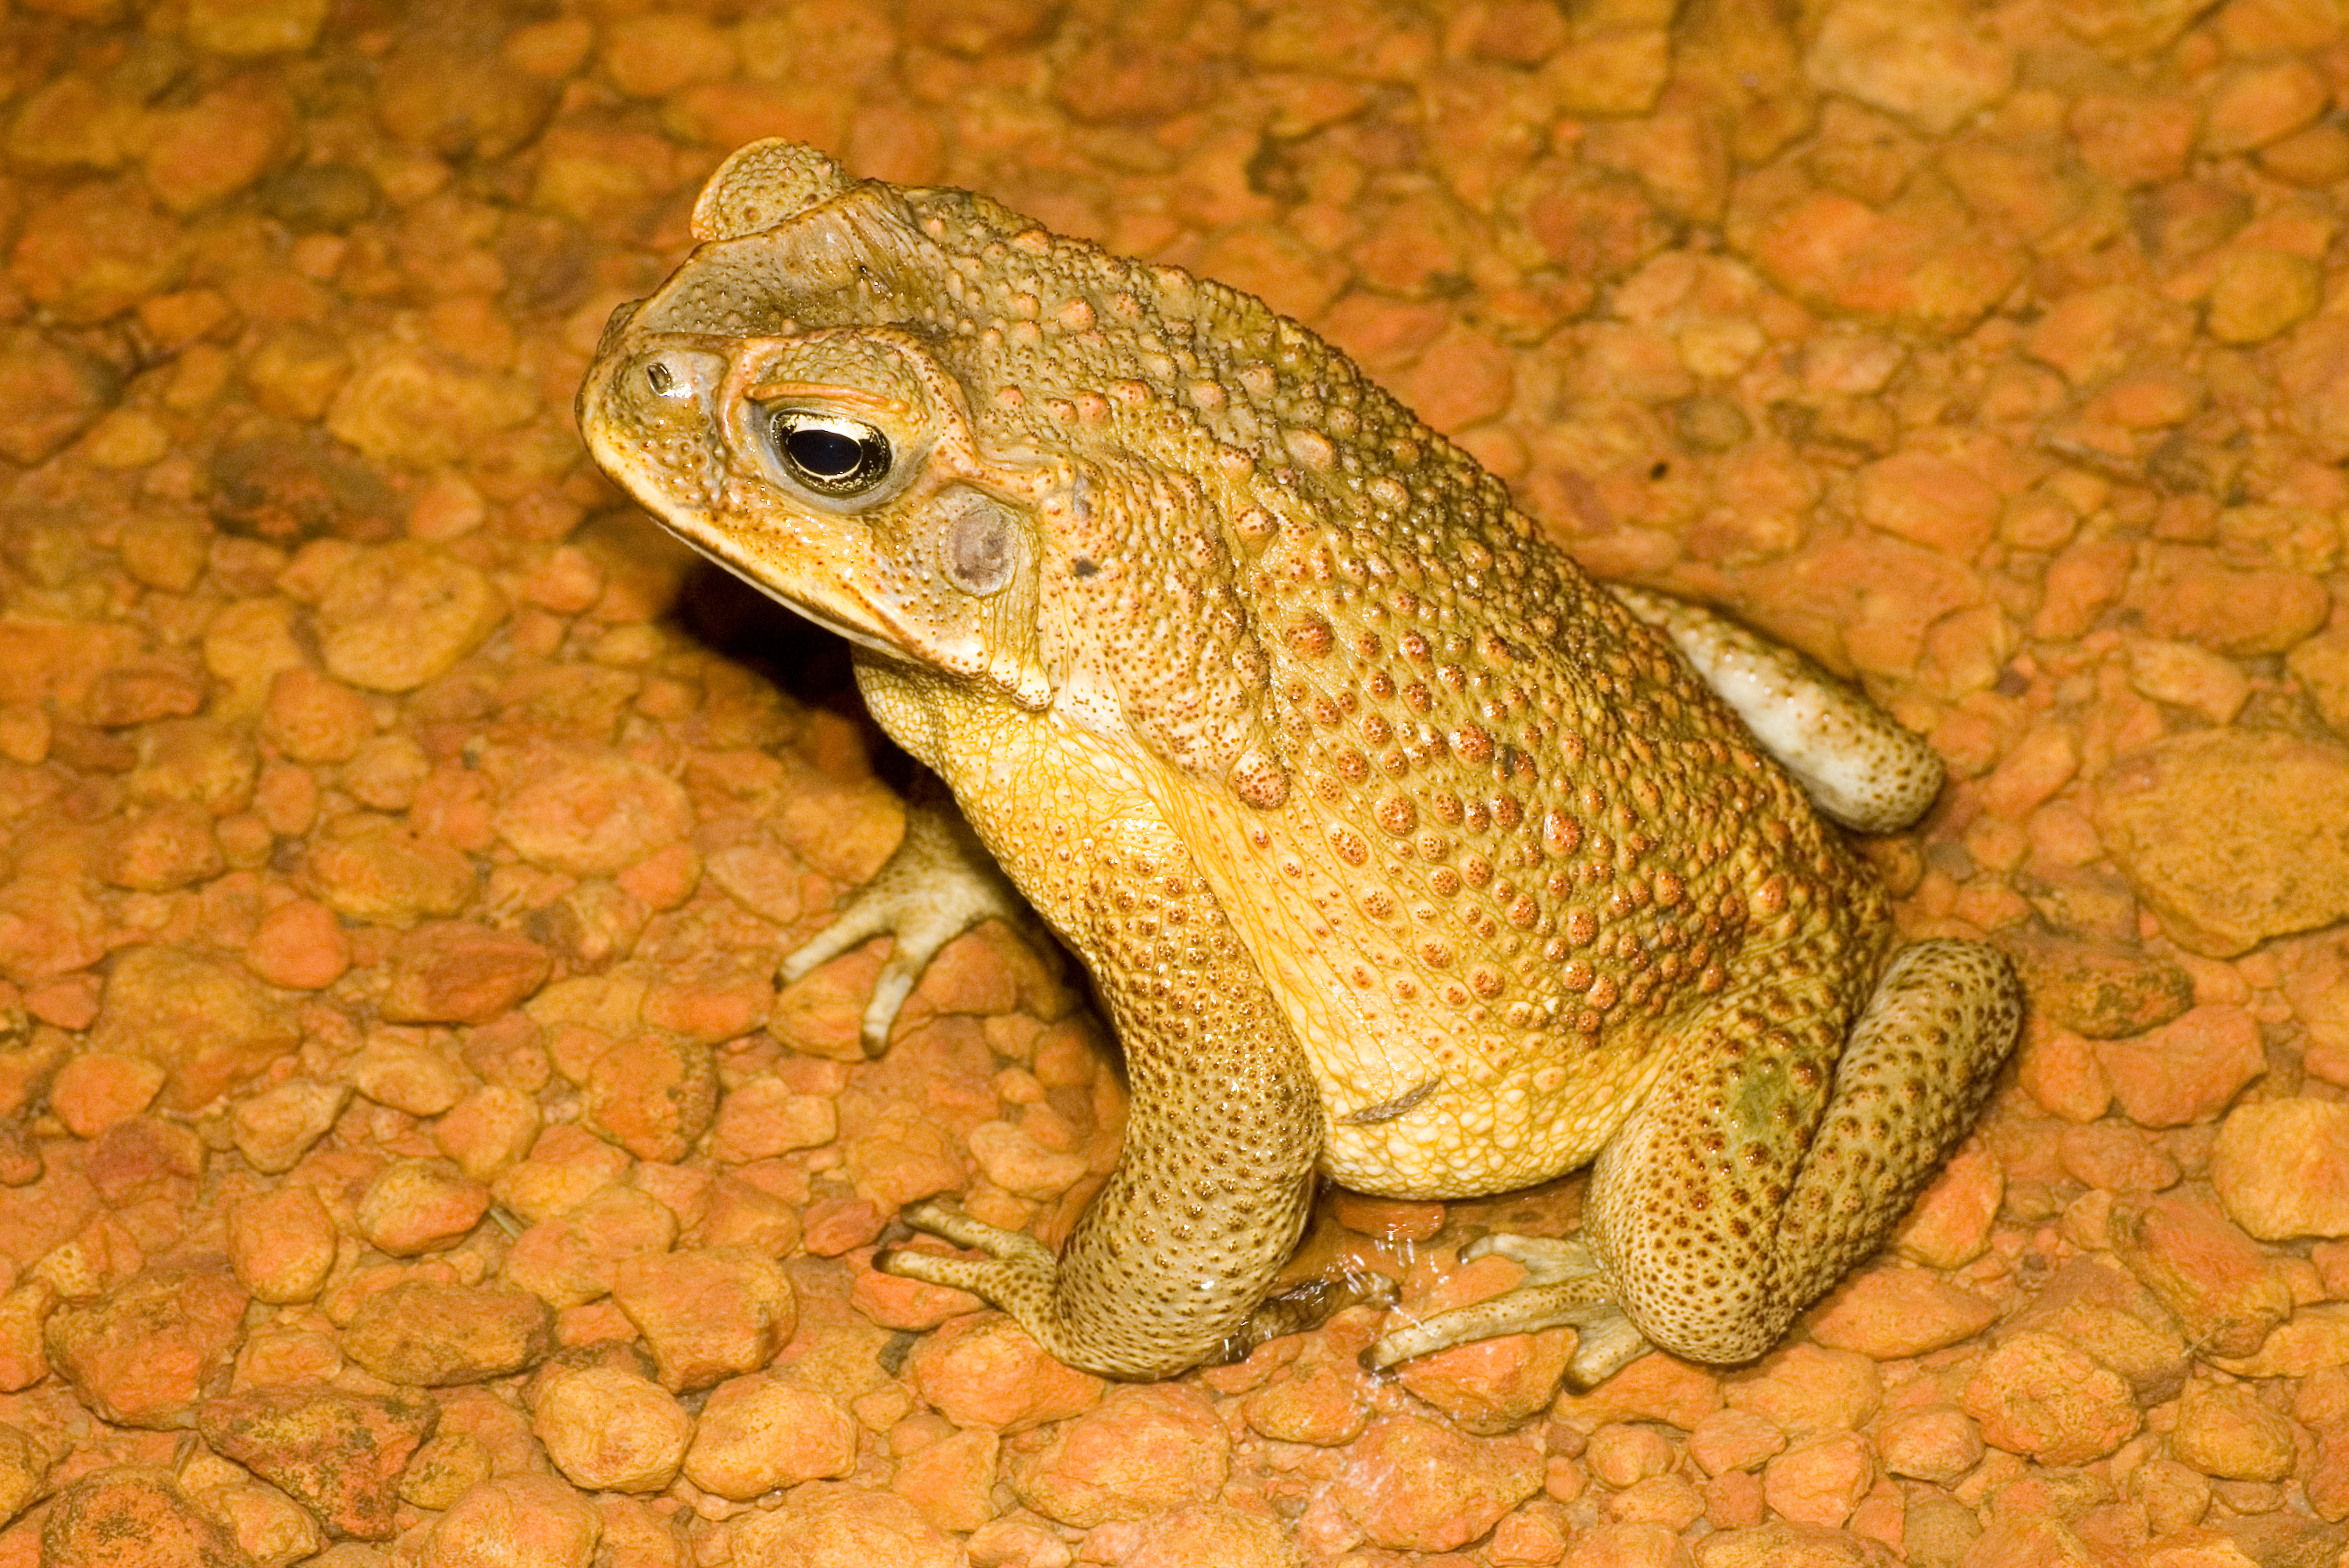 A male cane toad. Photo: David Newtown